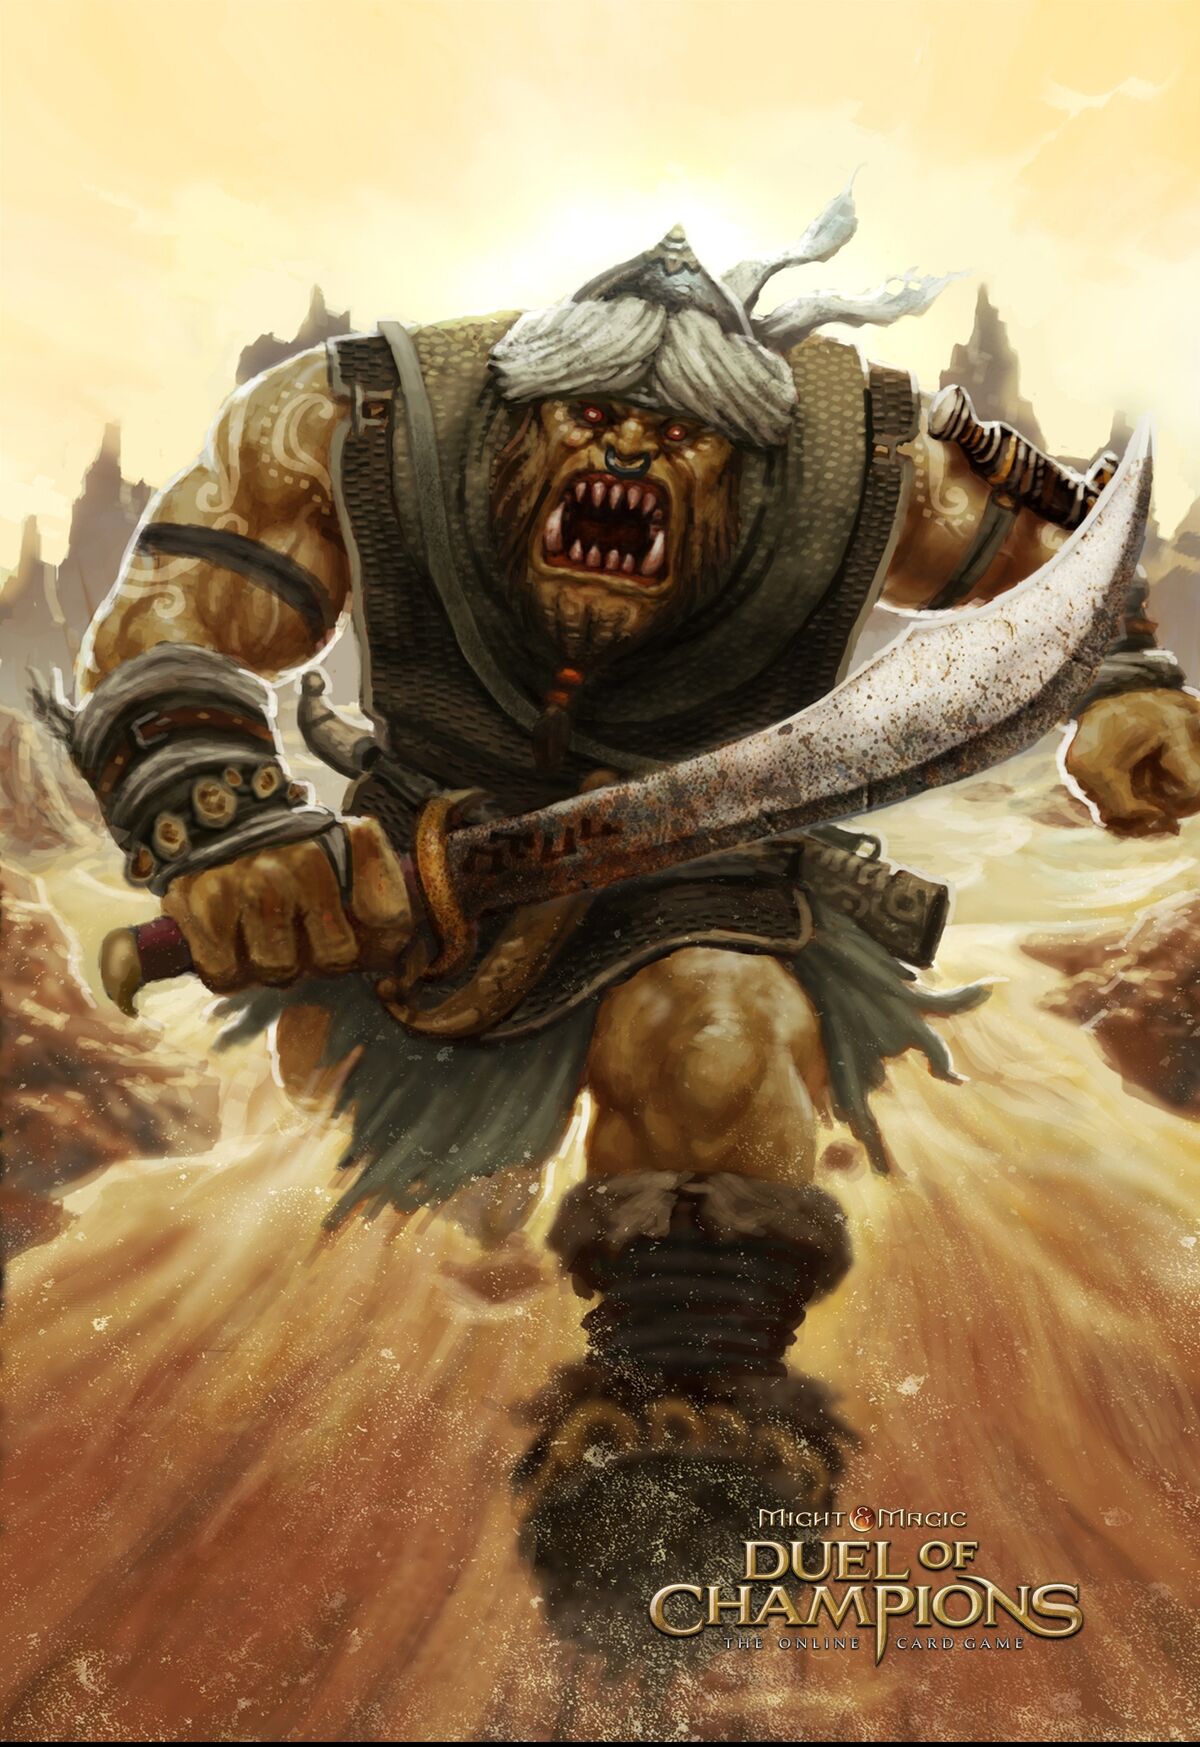 𝕸𝖊𝖙𝖆𝖑 𝕳𝖊𝖆𝖉 𝕮𝖗𝖊𝖆𝖙𝖚𝖗𝖊 on X: Fearsome warriors, the zurigur  are formidable in the fields of battle, their basic infantry are  eight-foot-tall brutes able to bite off the upper half of a man